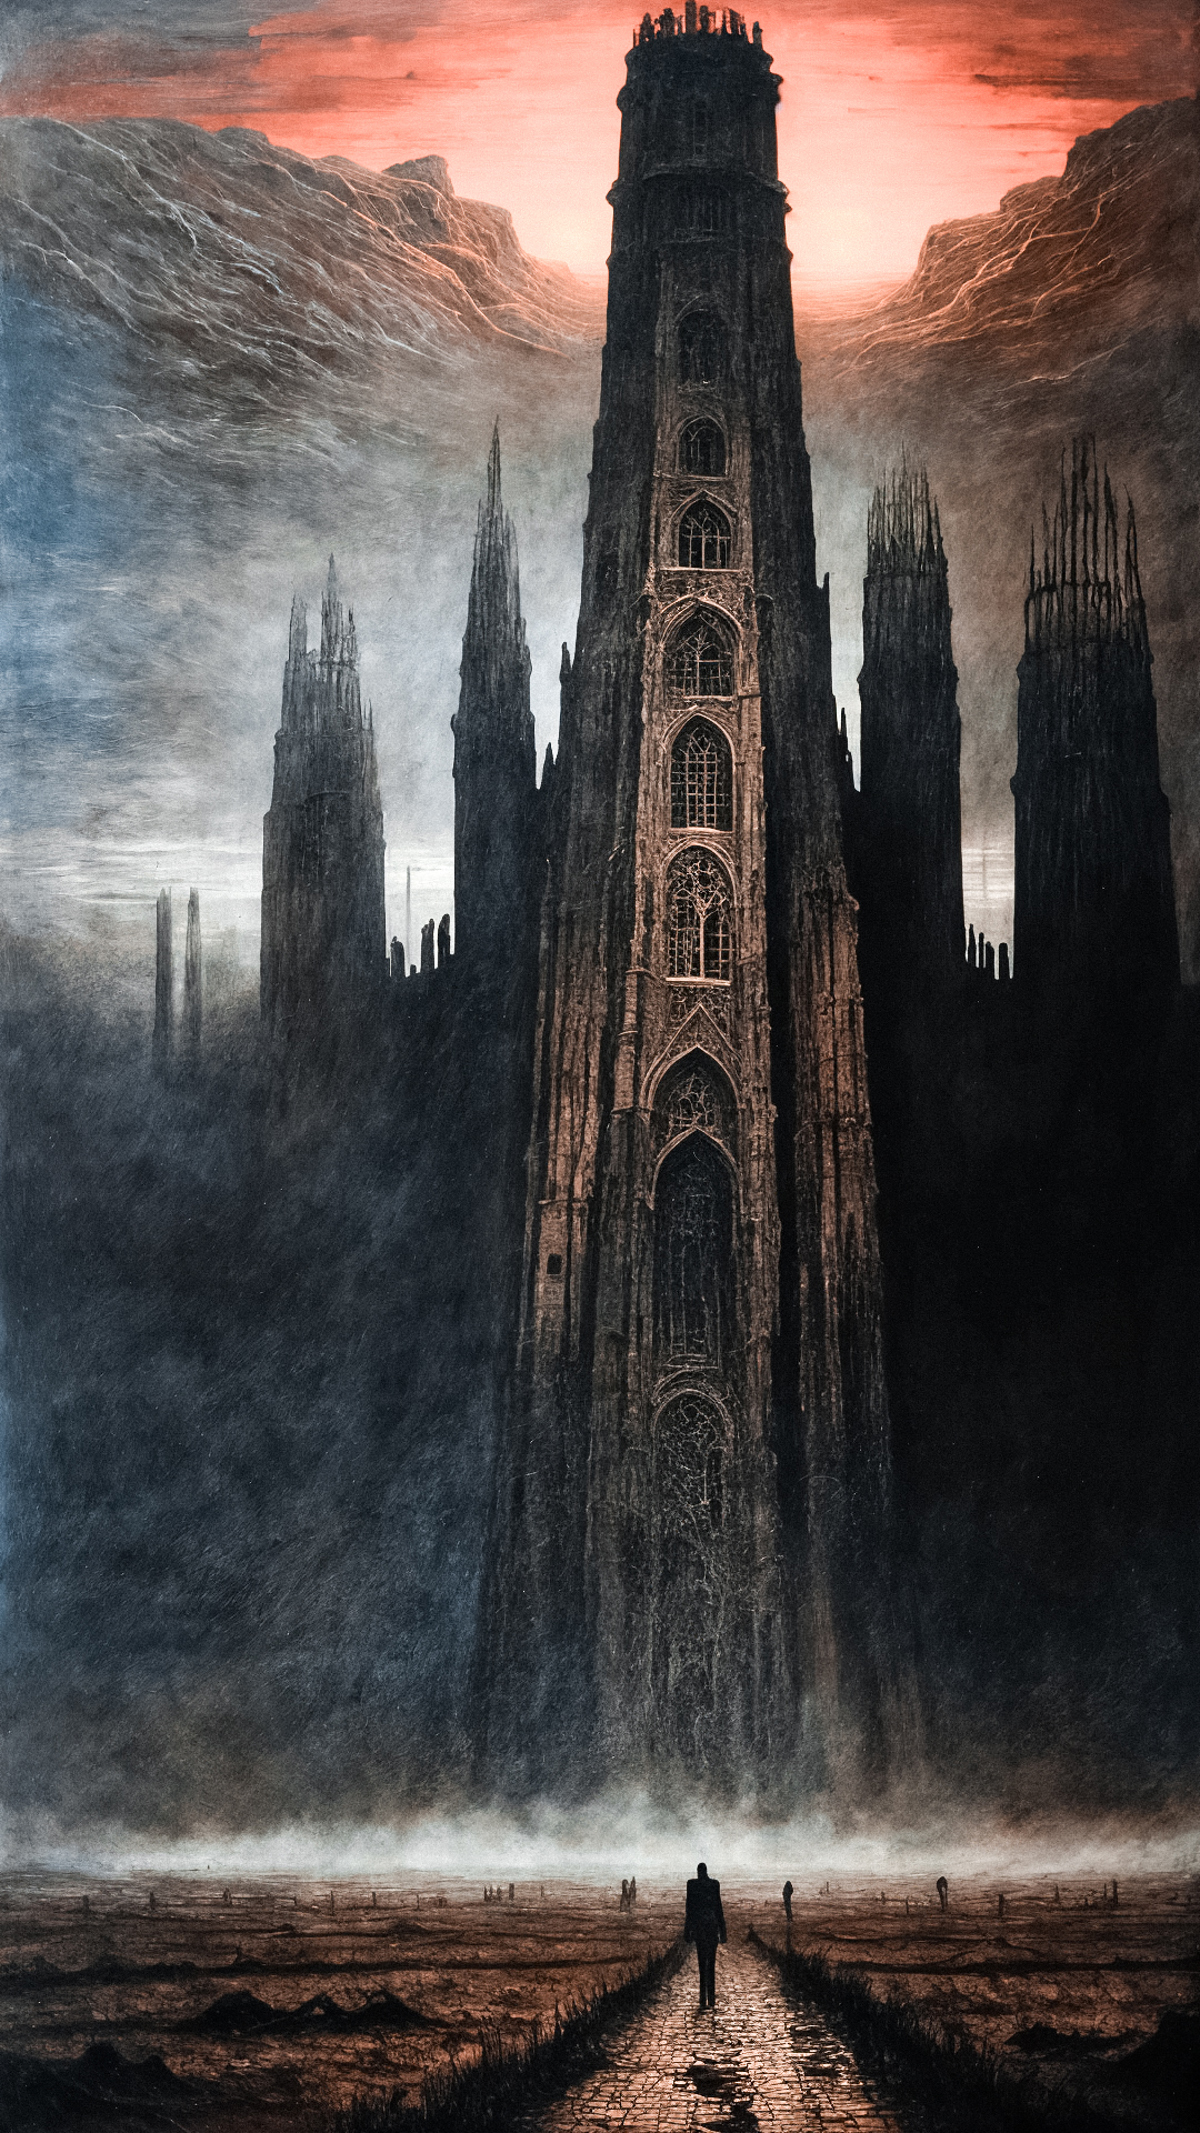 A dark and moody drawing of a large castle or cathedral with multiple towers and windows.